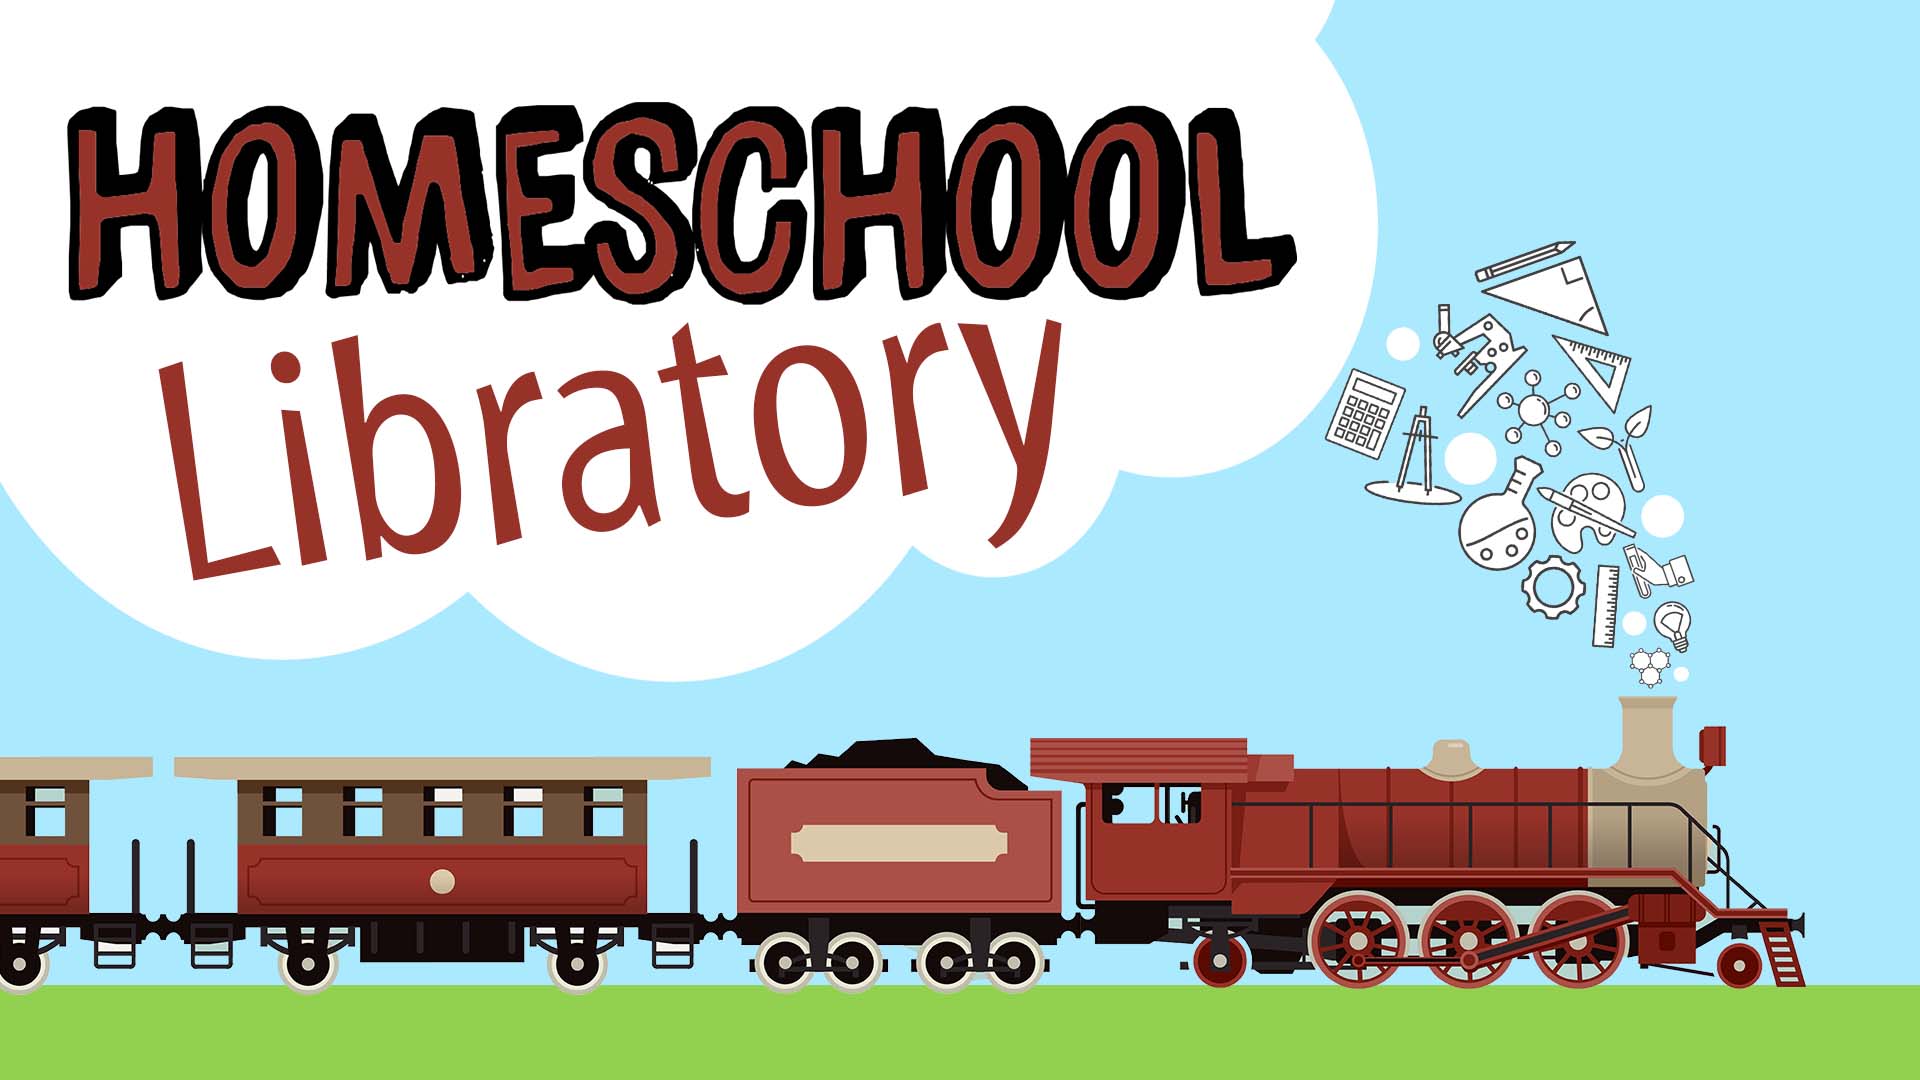 Image shows a red train traveling from left to right past green grass and a blue sky. Steam from the engine comes out in the shape of school supplies and other symbols including a light bulb, an artist pallette, a compass, a calculator, gears, a test tube, and a microscope. Inside a cloud of smoke are the words "Homeschool Librartory."